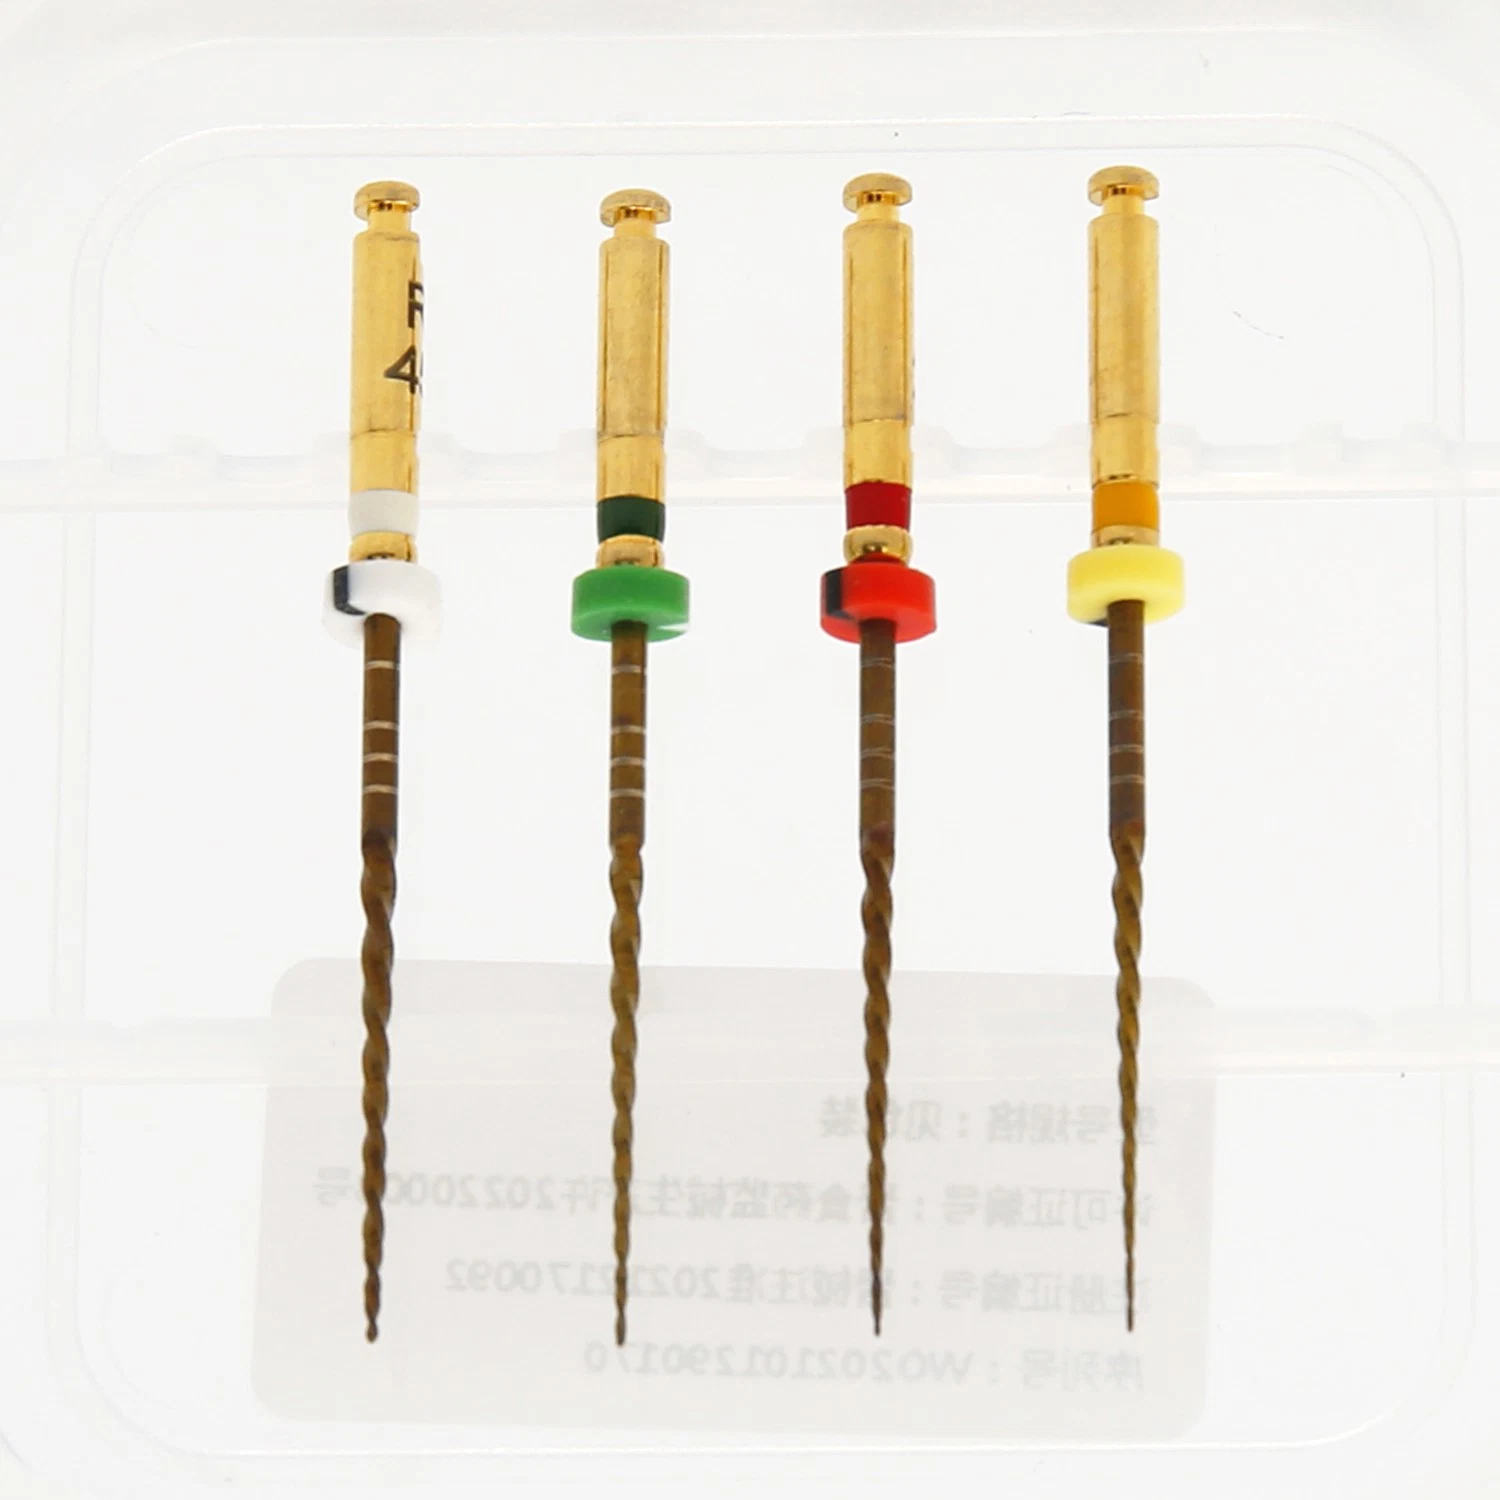 Golden 21mm/25mm/31mmwave One Users Root Canal Dental Endodontic Files Niti Super One Files